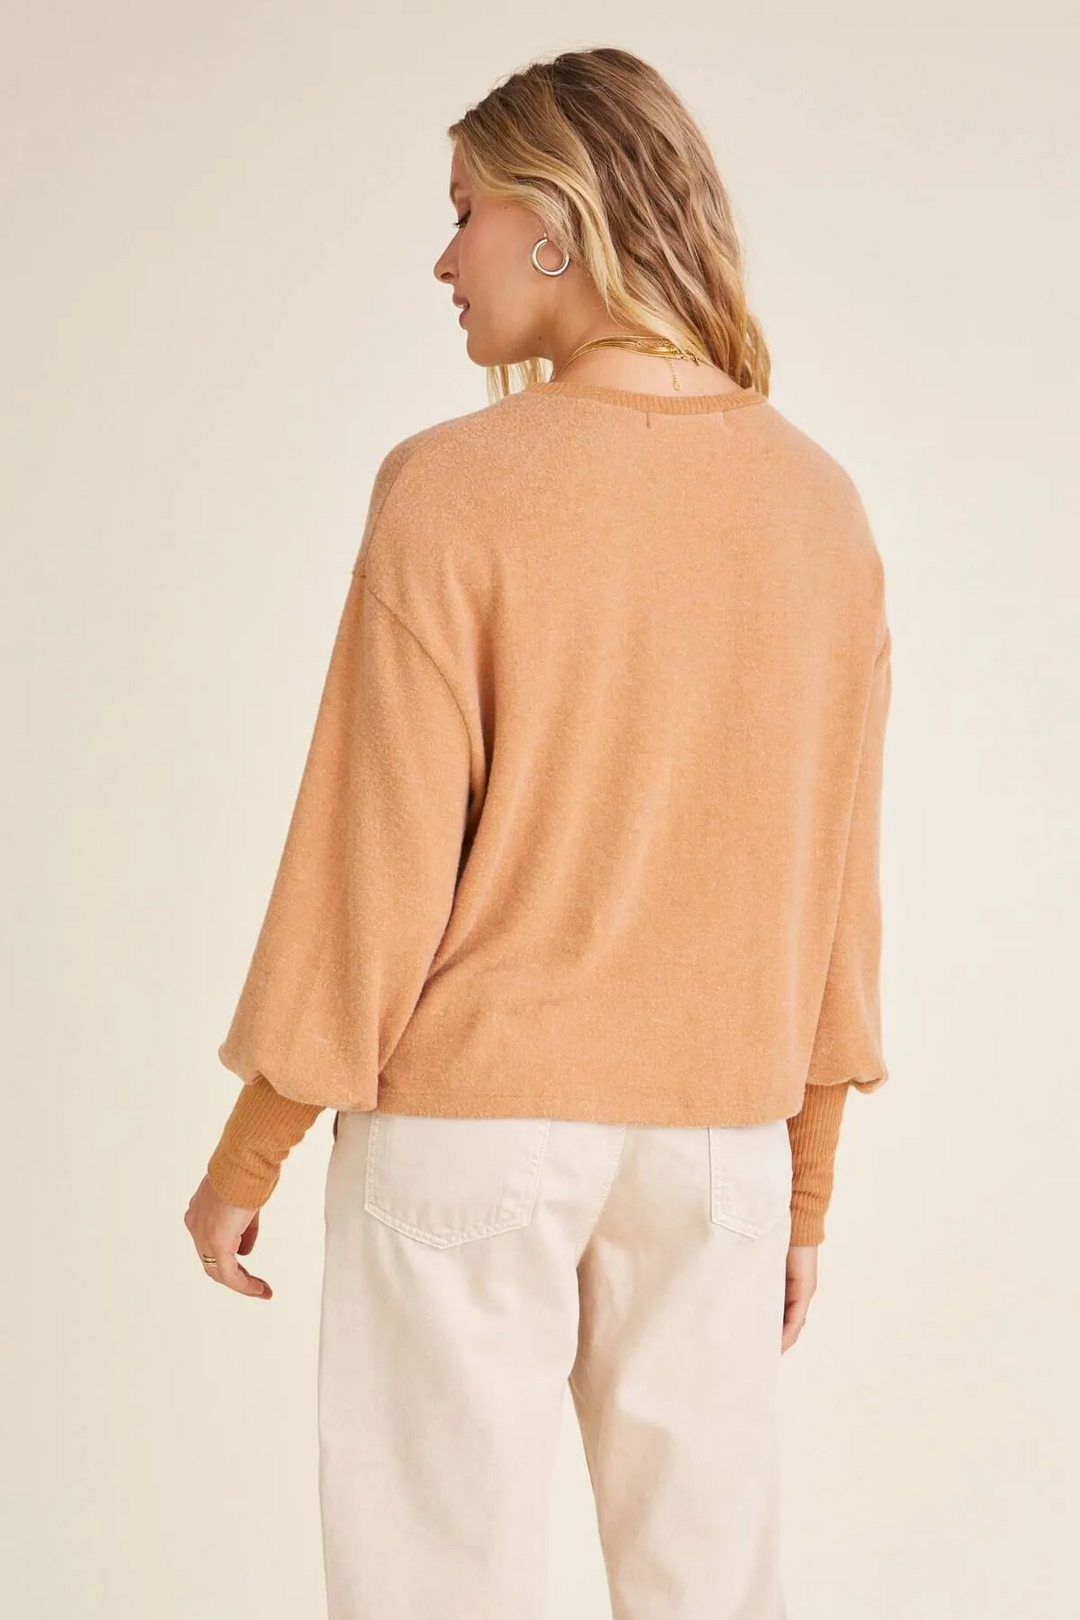 KAIN HEATHERED COZY CREW - Kingfisher Road - Online Boutique